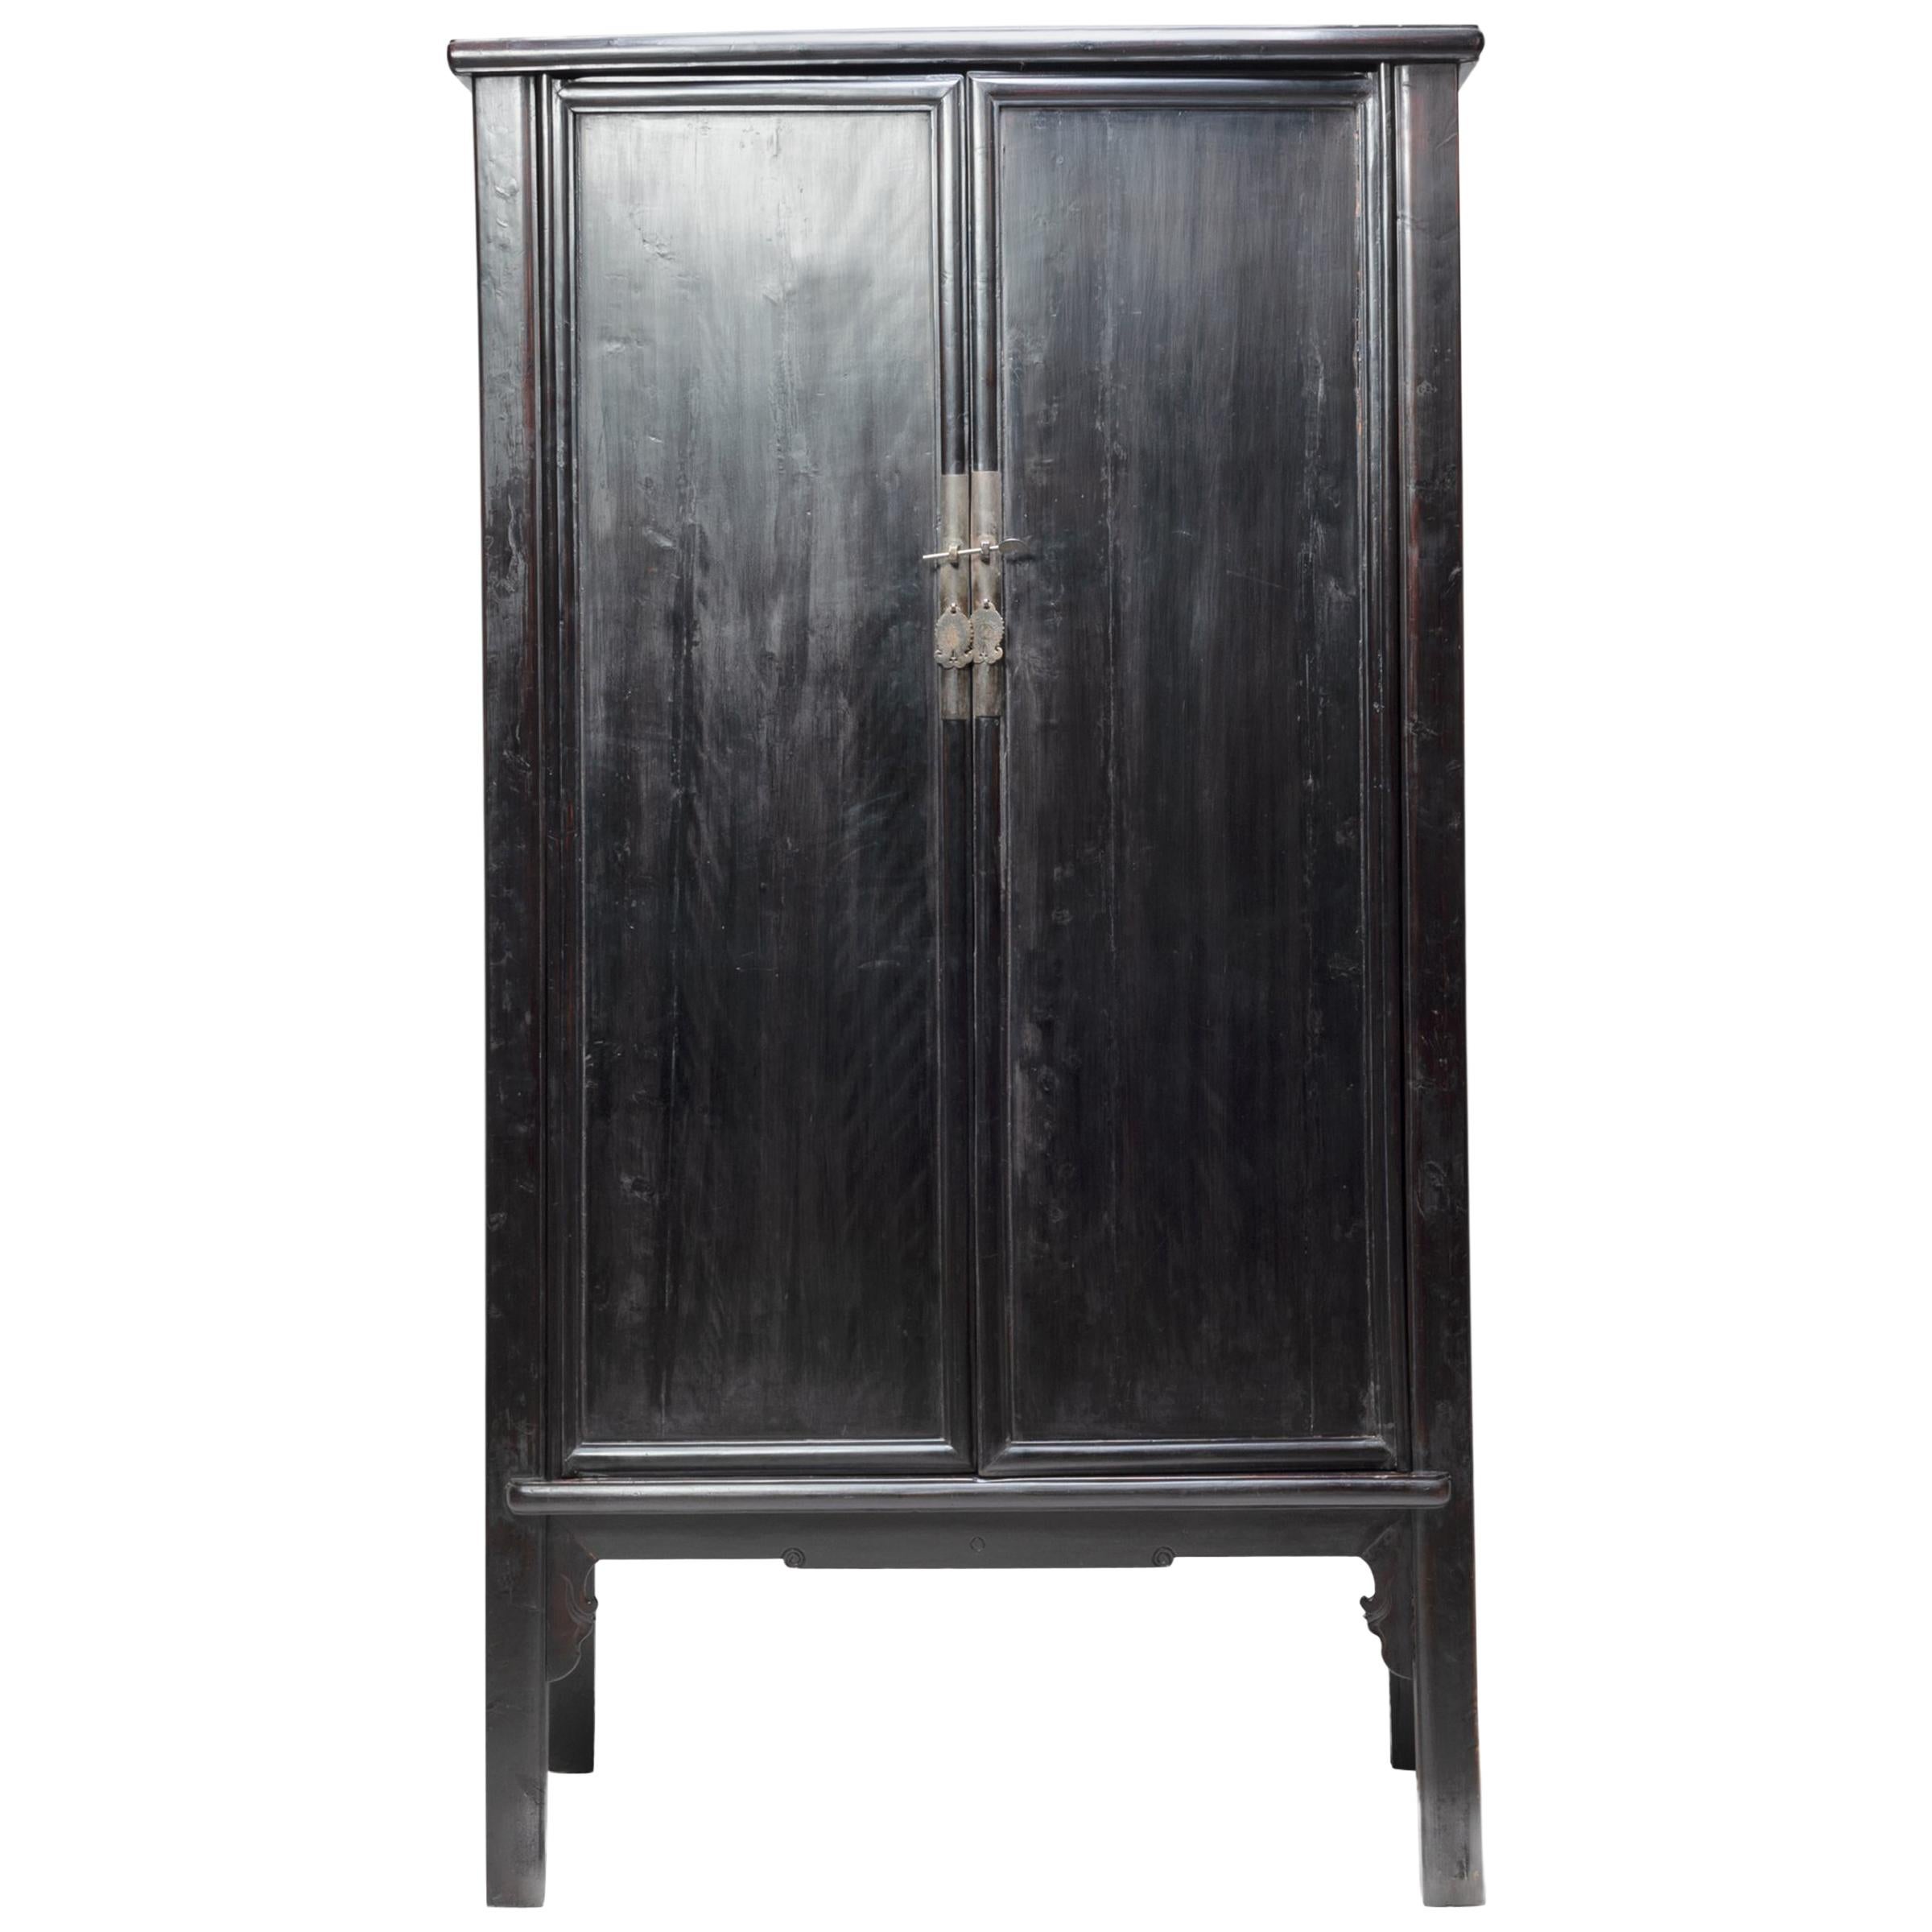 Chinese Black Lacquer Scholar's Cabinet, c. 1850